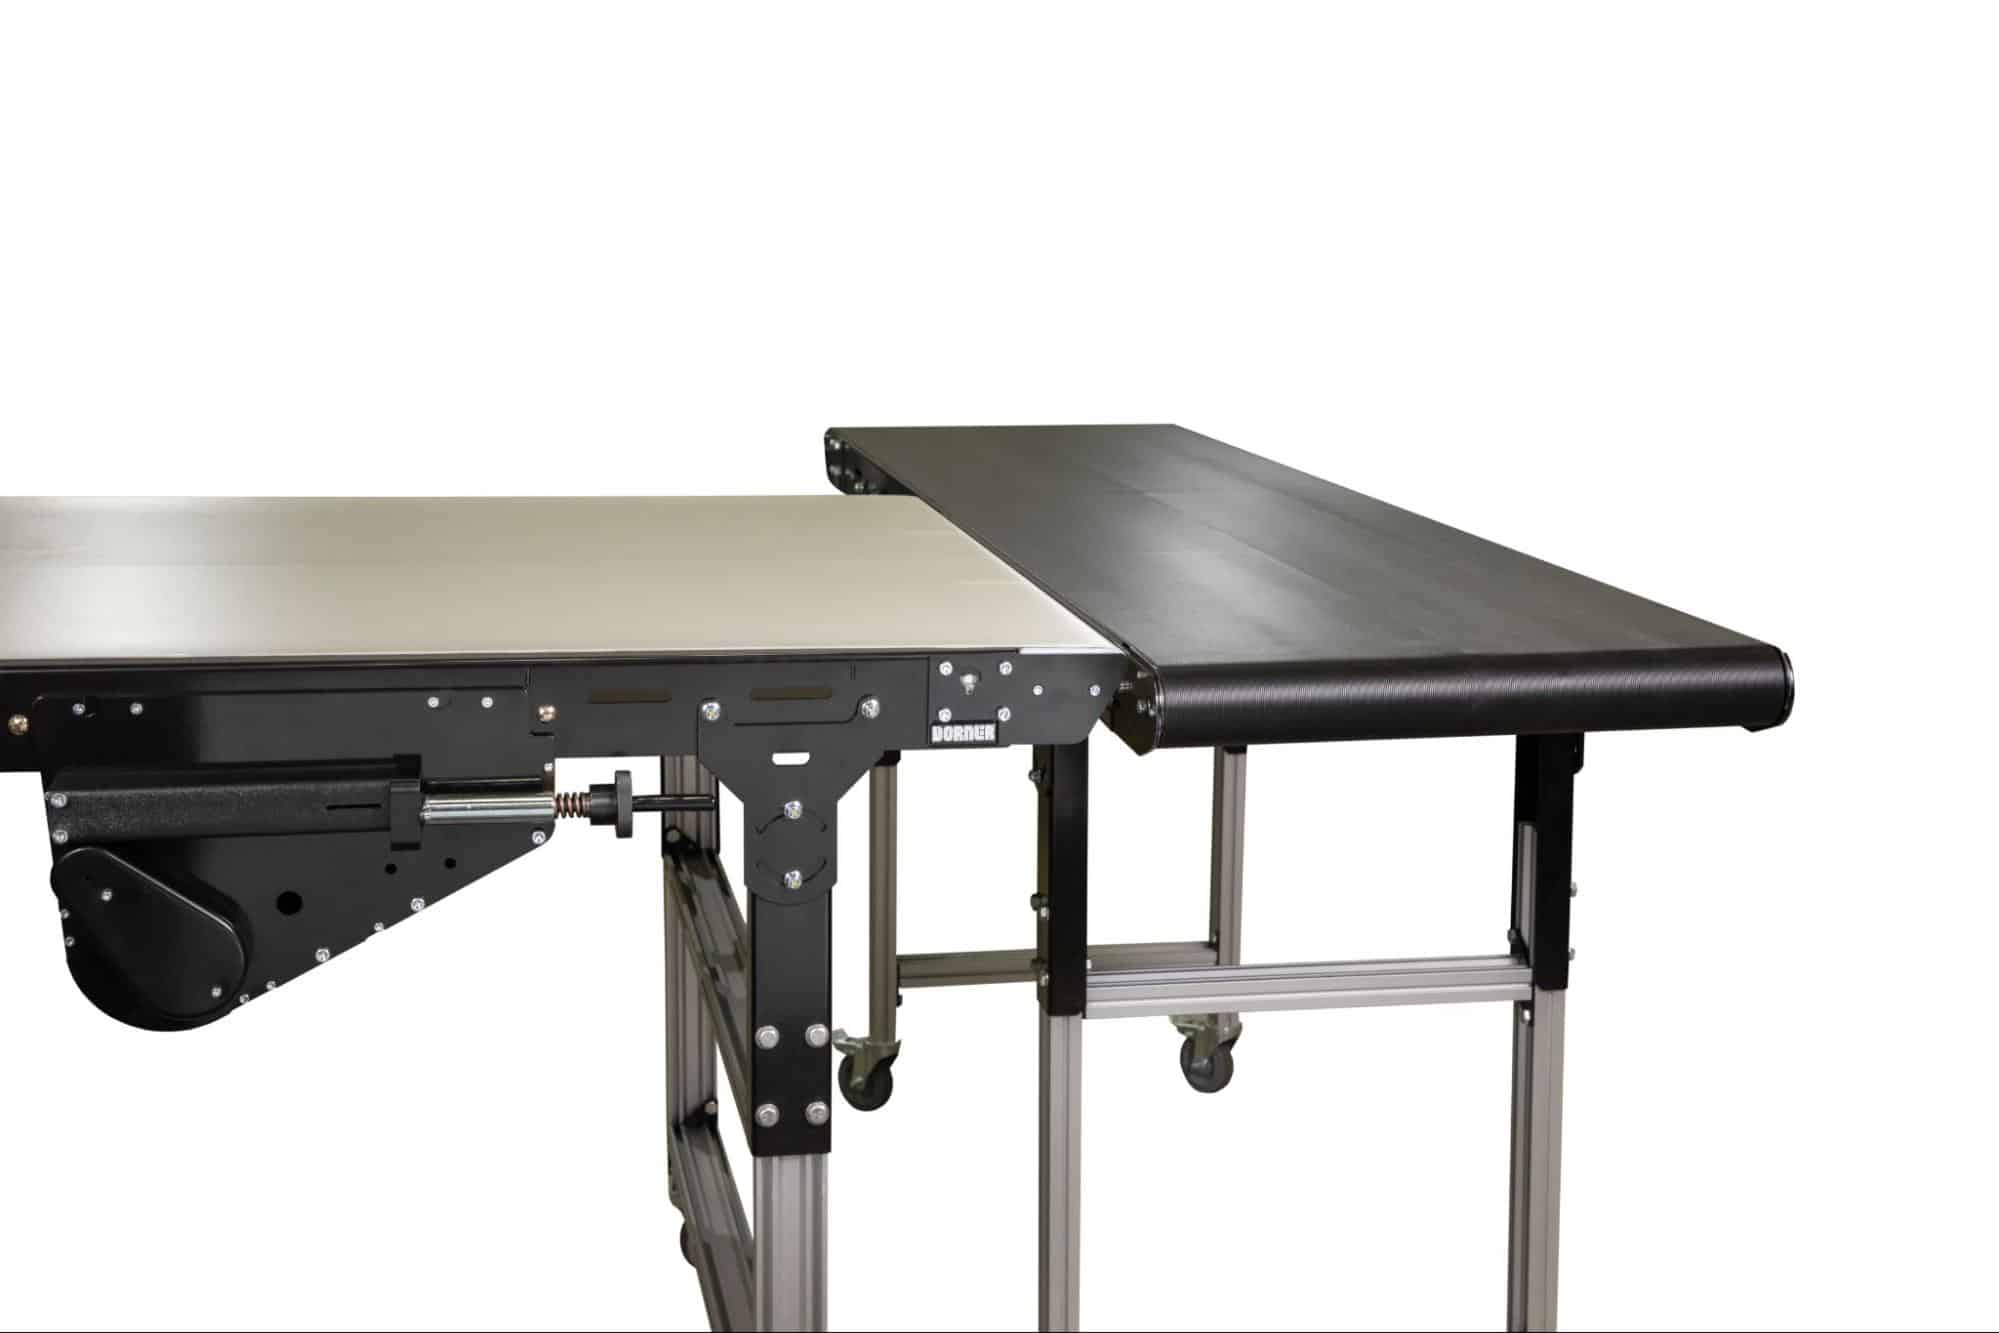 The new DCMove series conveyor from Dorner, for tight product transfer.